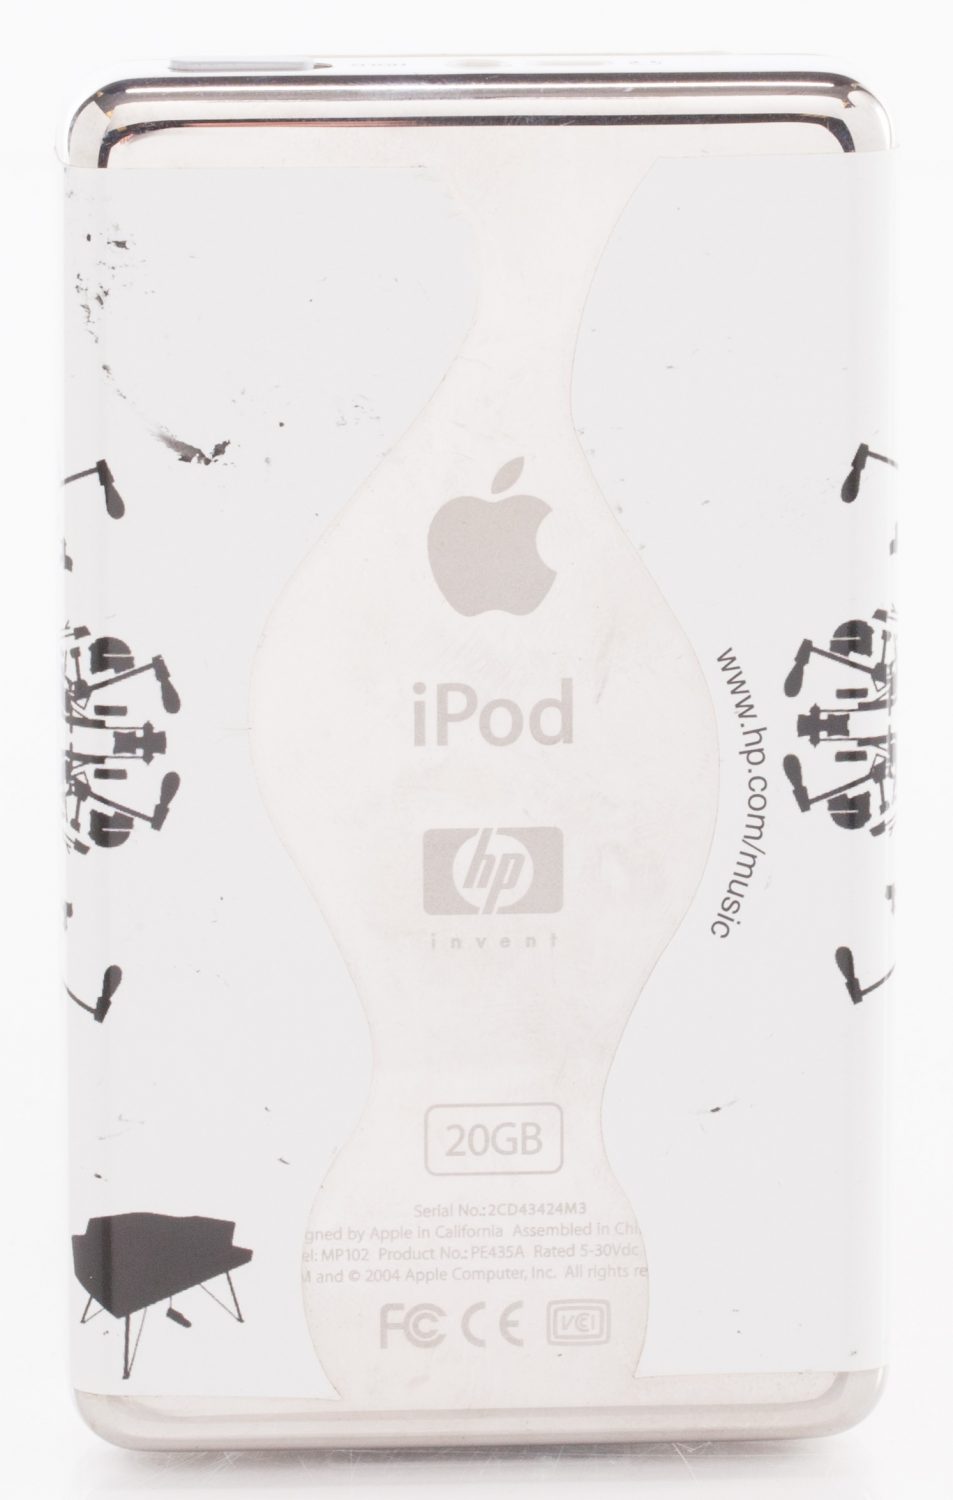 The back of an iPod featuring HP and Apple branding. 